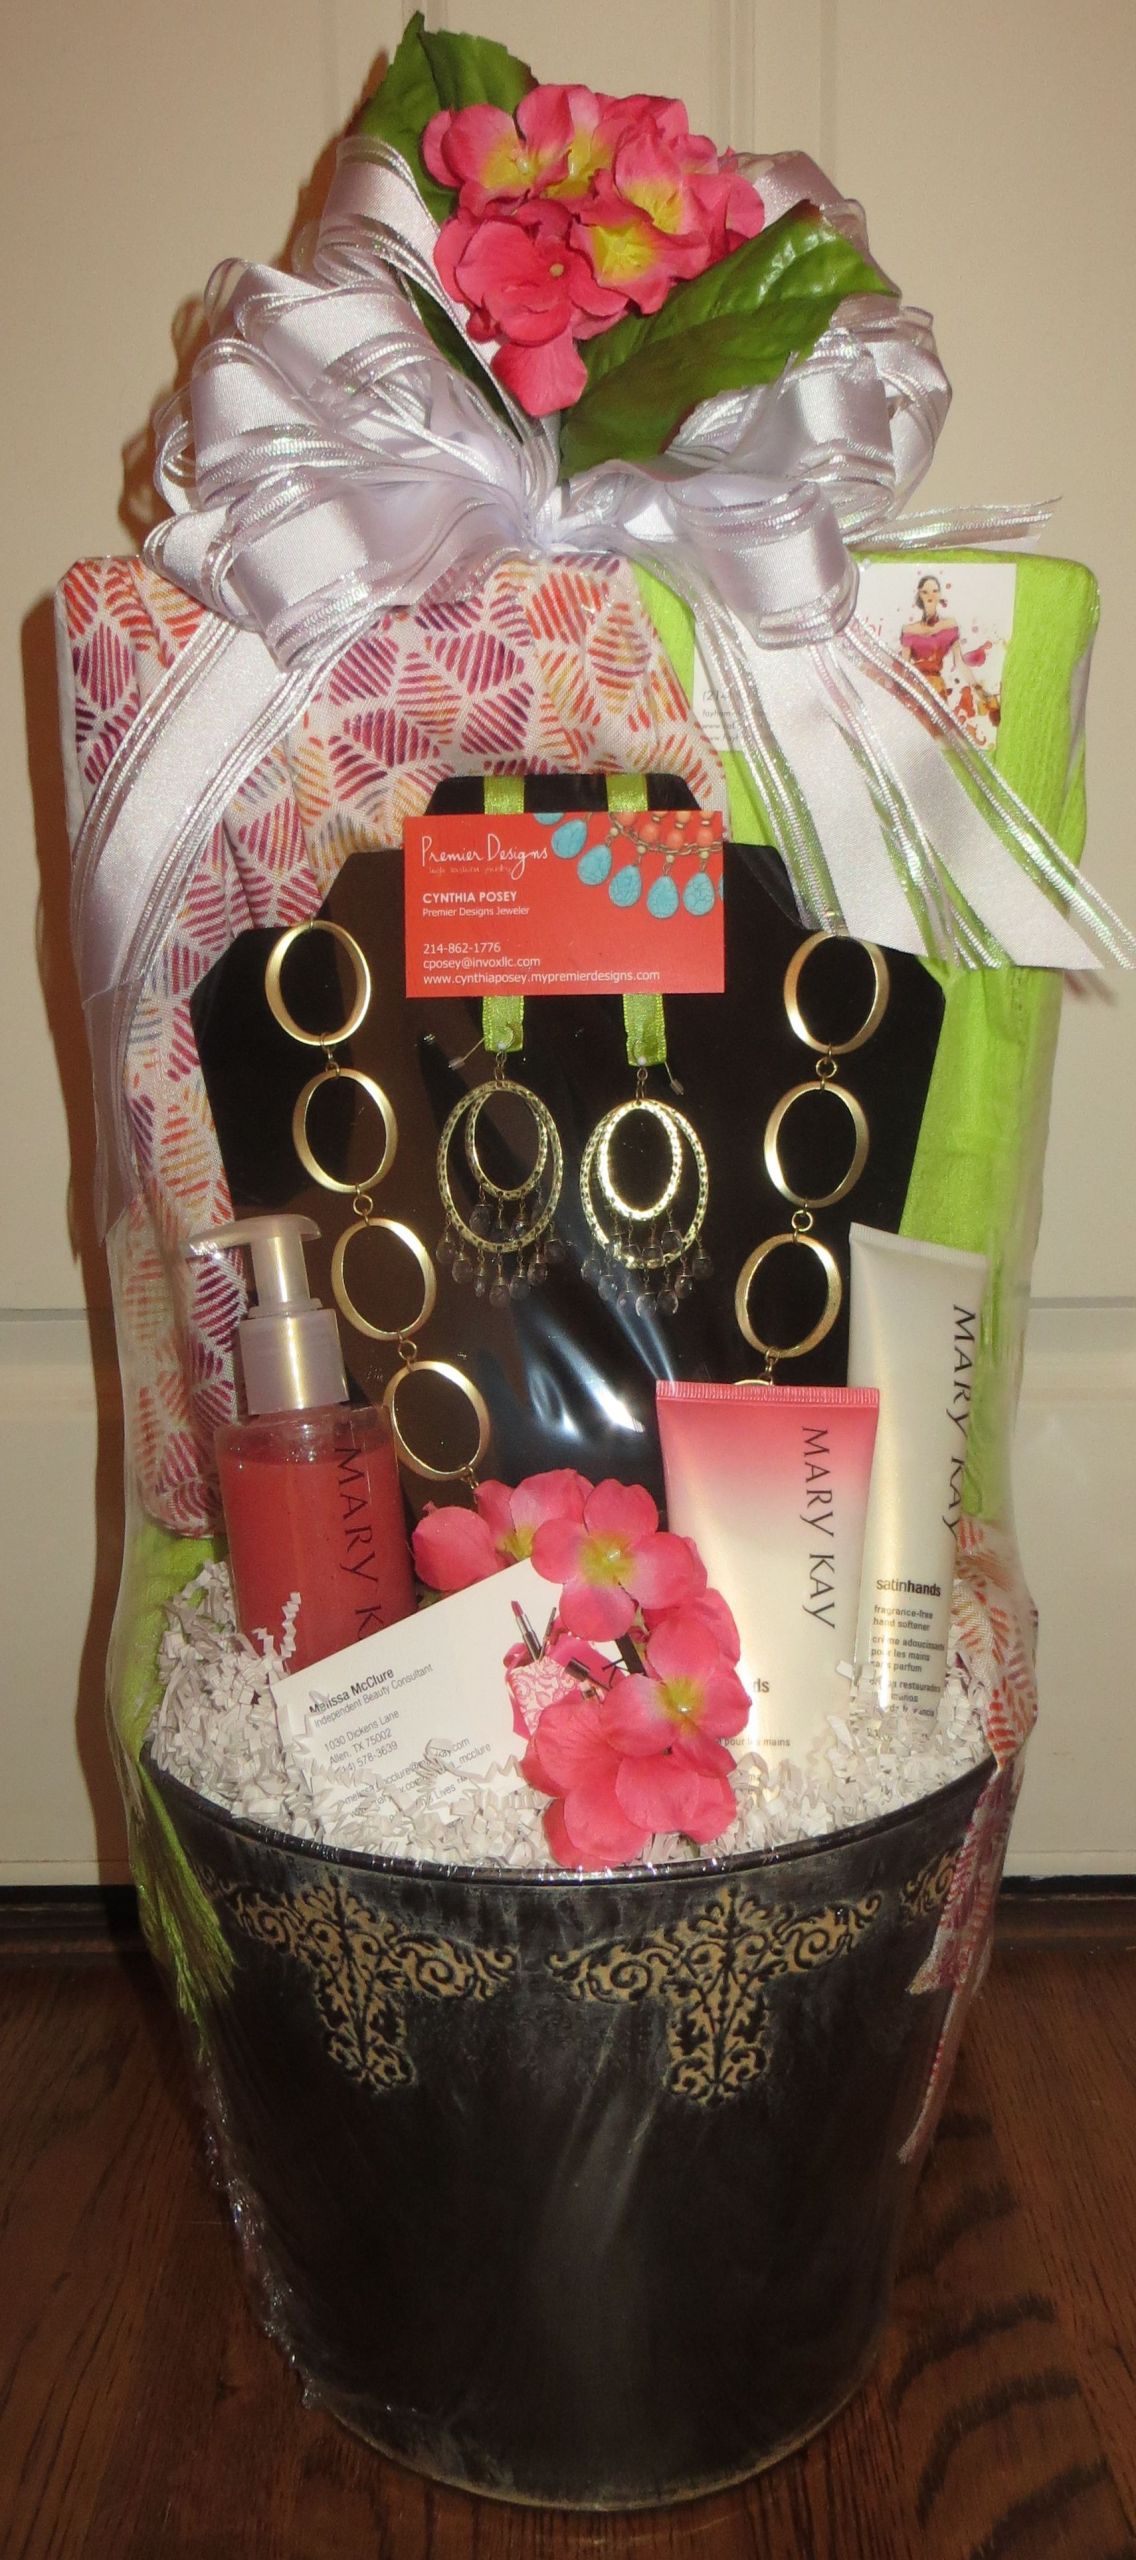 Mary Kay Gift Baskets Ideas
 Spring Fashion Gift Basket Mary Kay CAbi and Premier